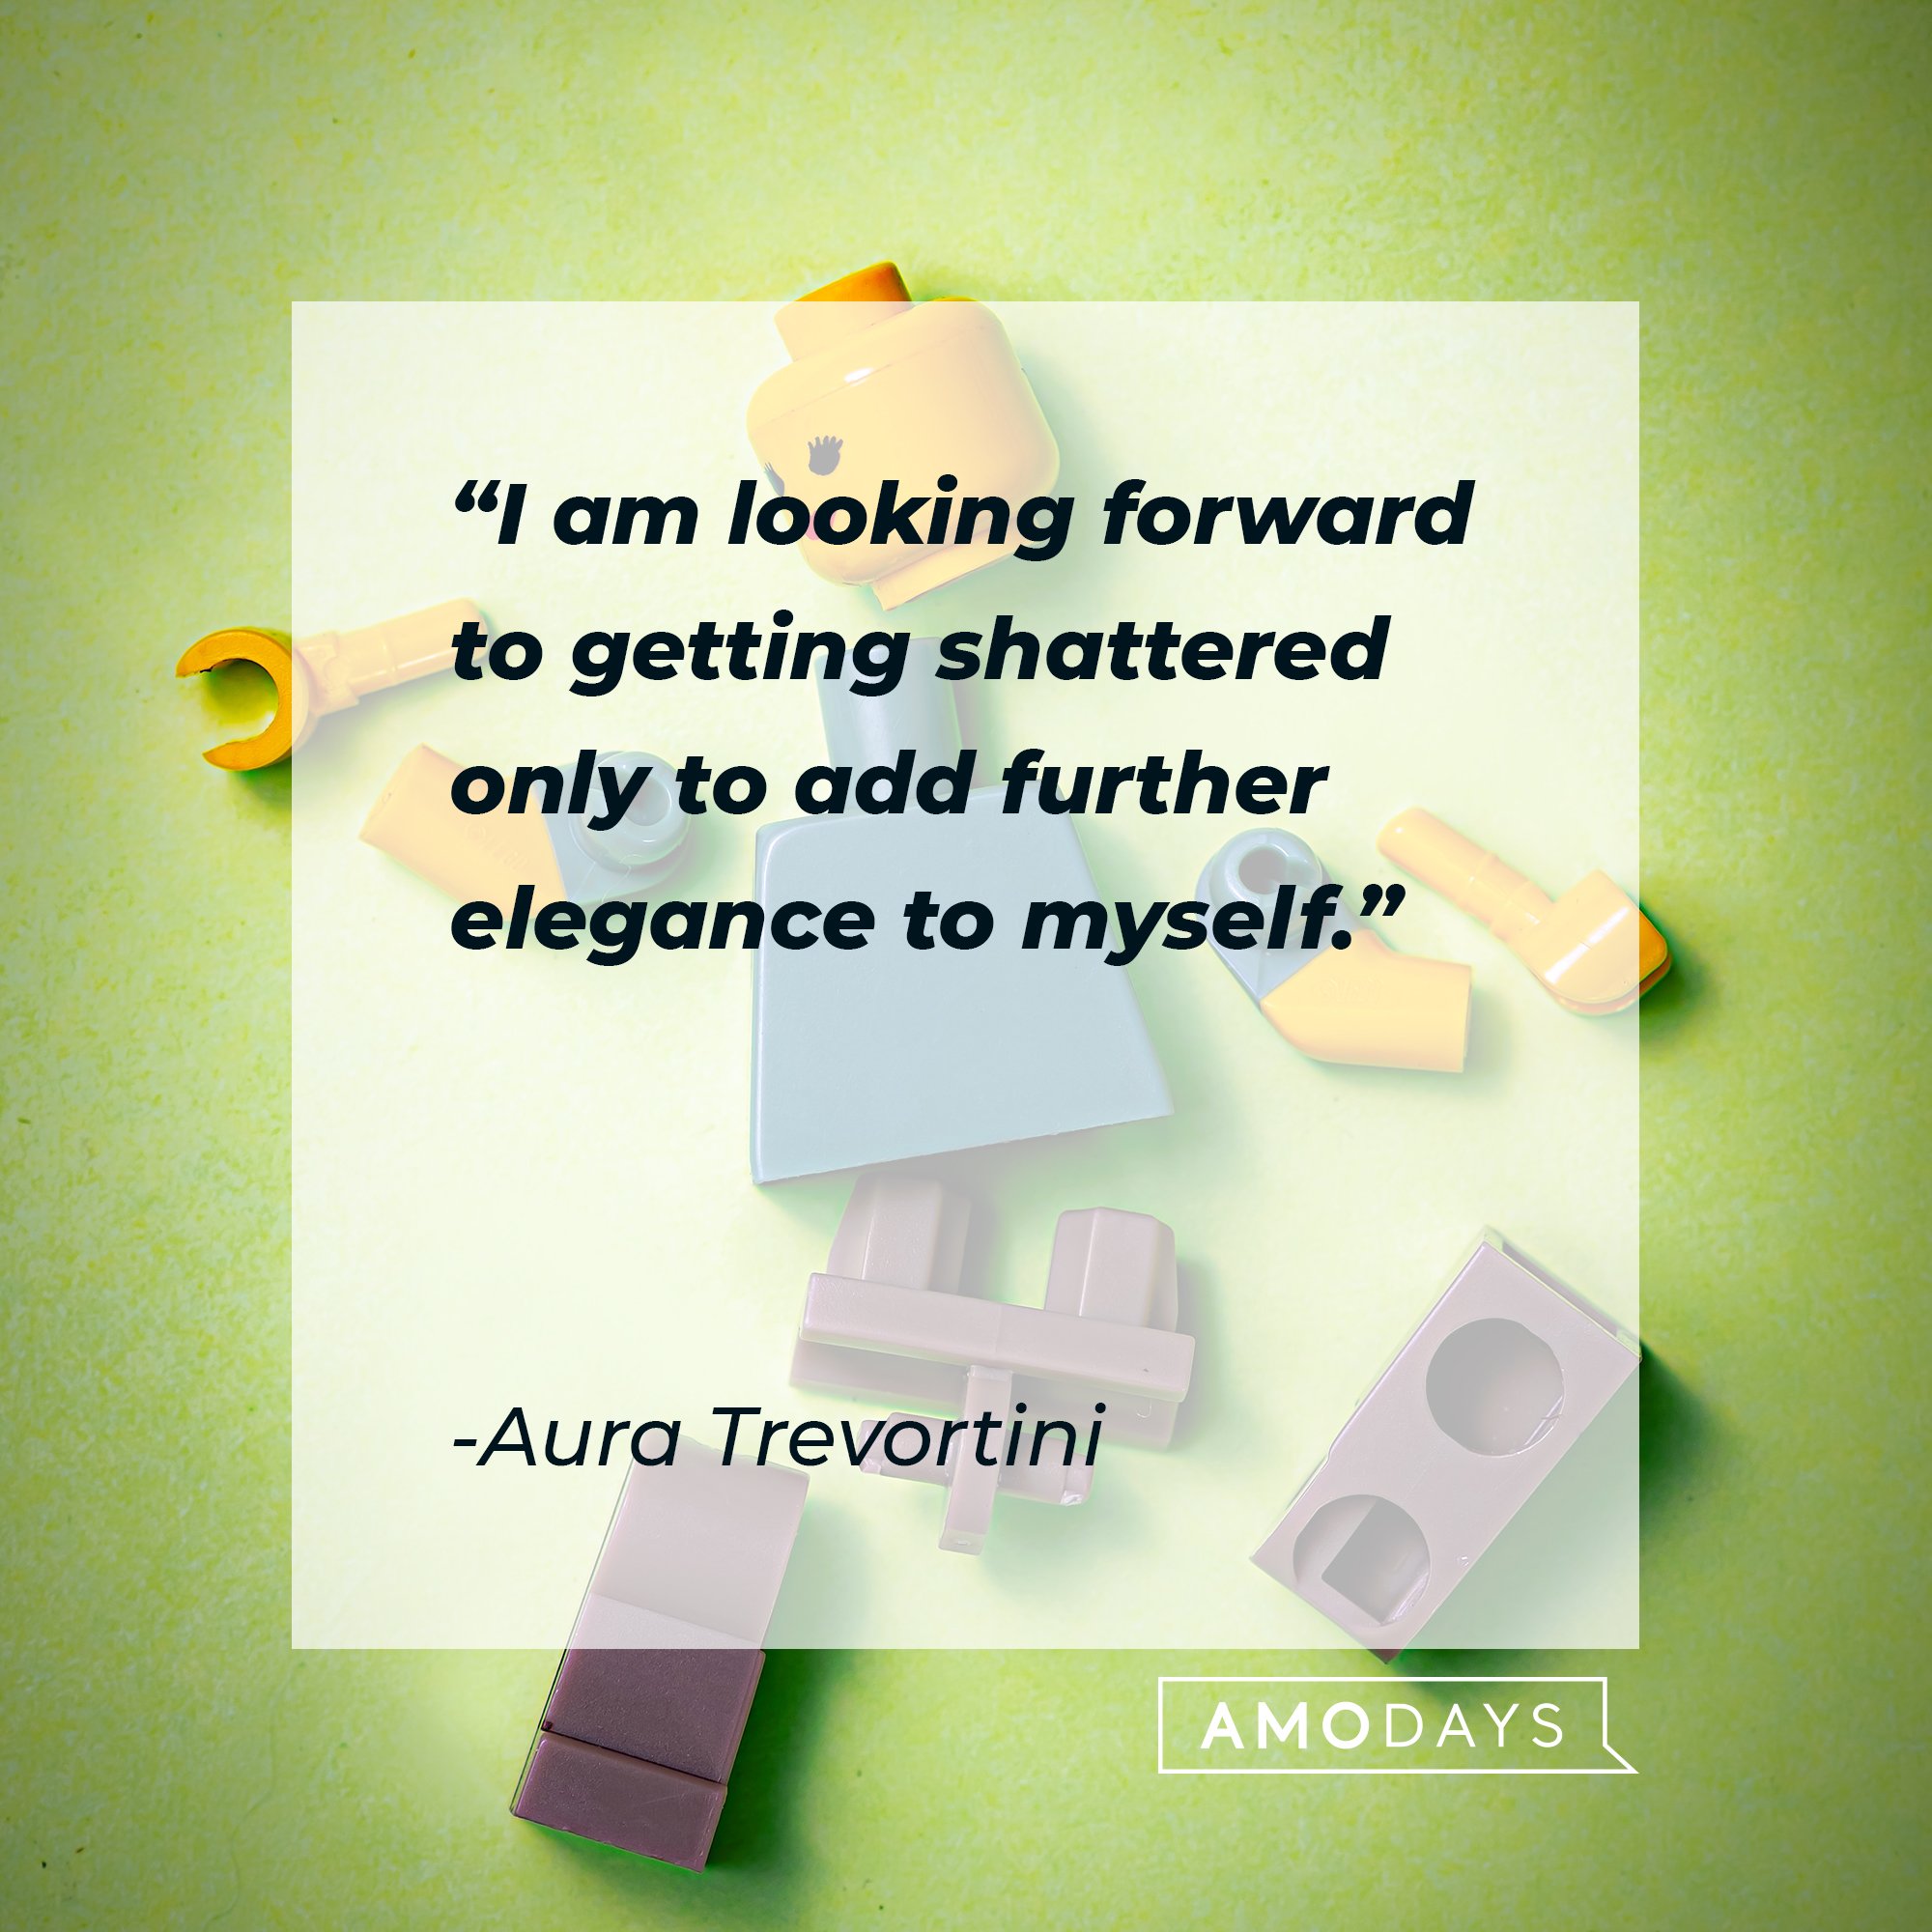 Aura Trevortini’s quote: "I am looking forward to getting shattered only to add further elegance to myself." | Image: AmoDays